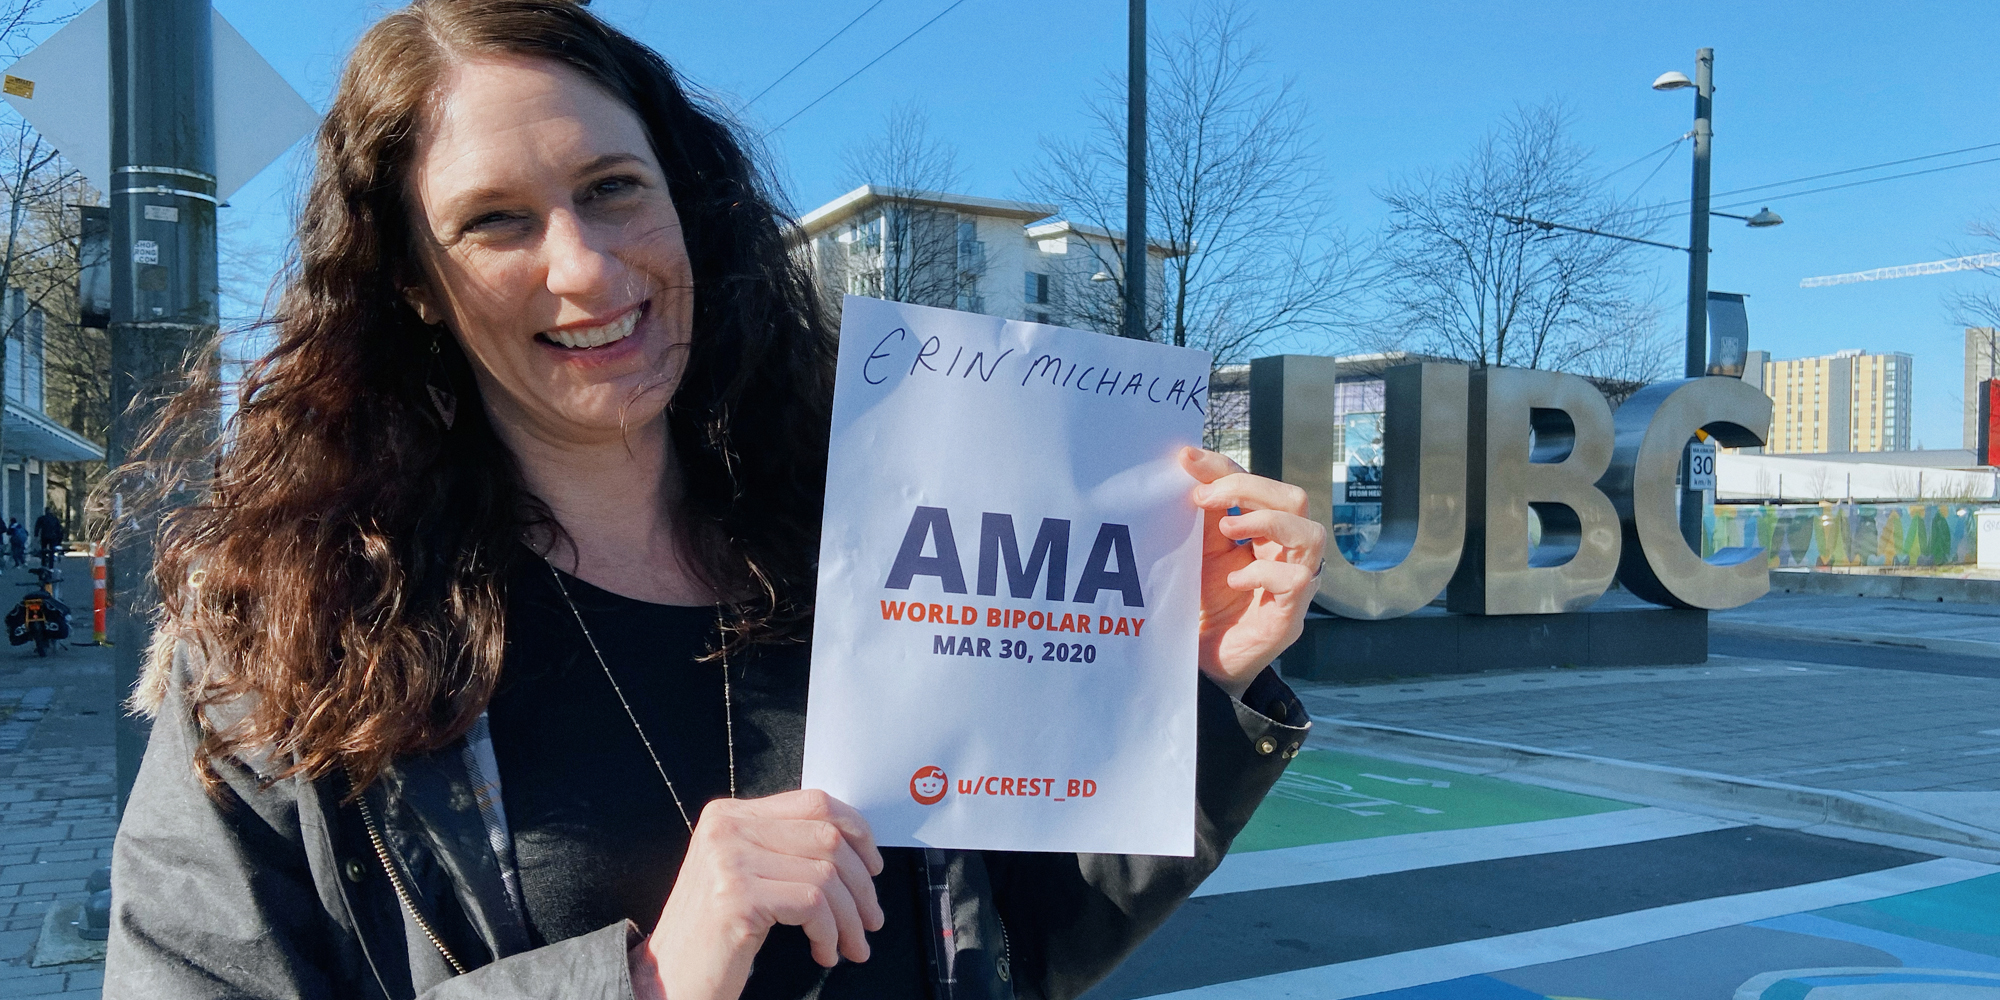 Erin outside, smiling and standing by a statue of the UBC logo. She is holding a sign proving she will be involved in the bipolar ama, with her name and the AMA date and time on it.